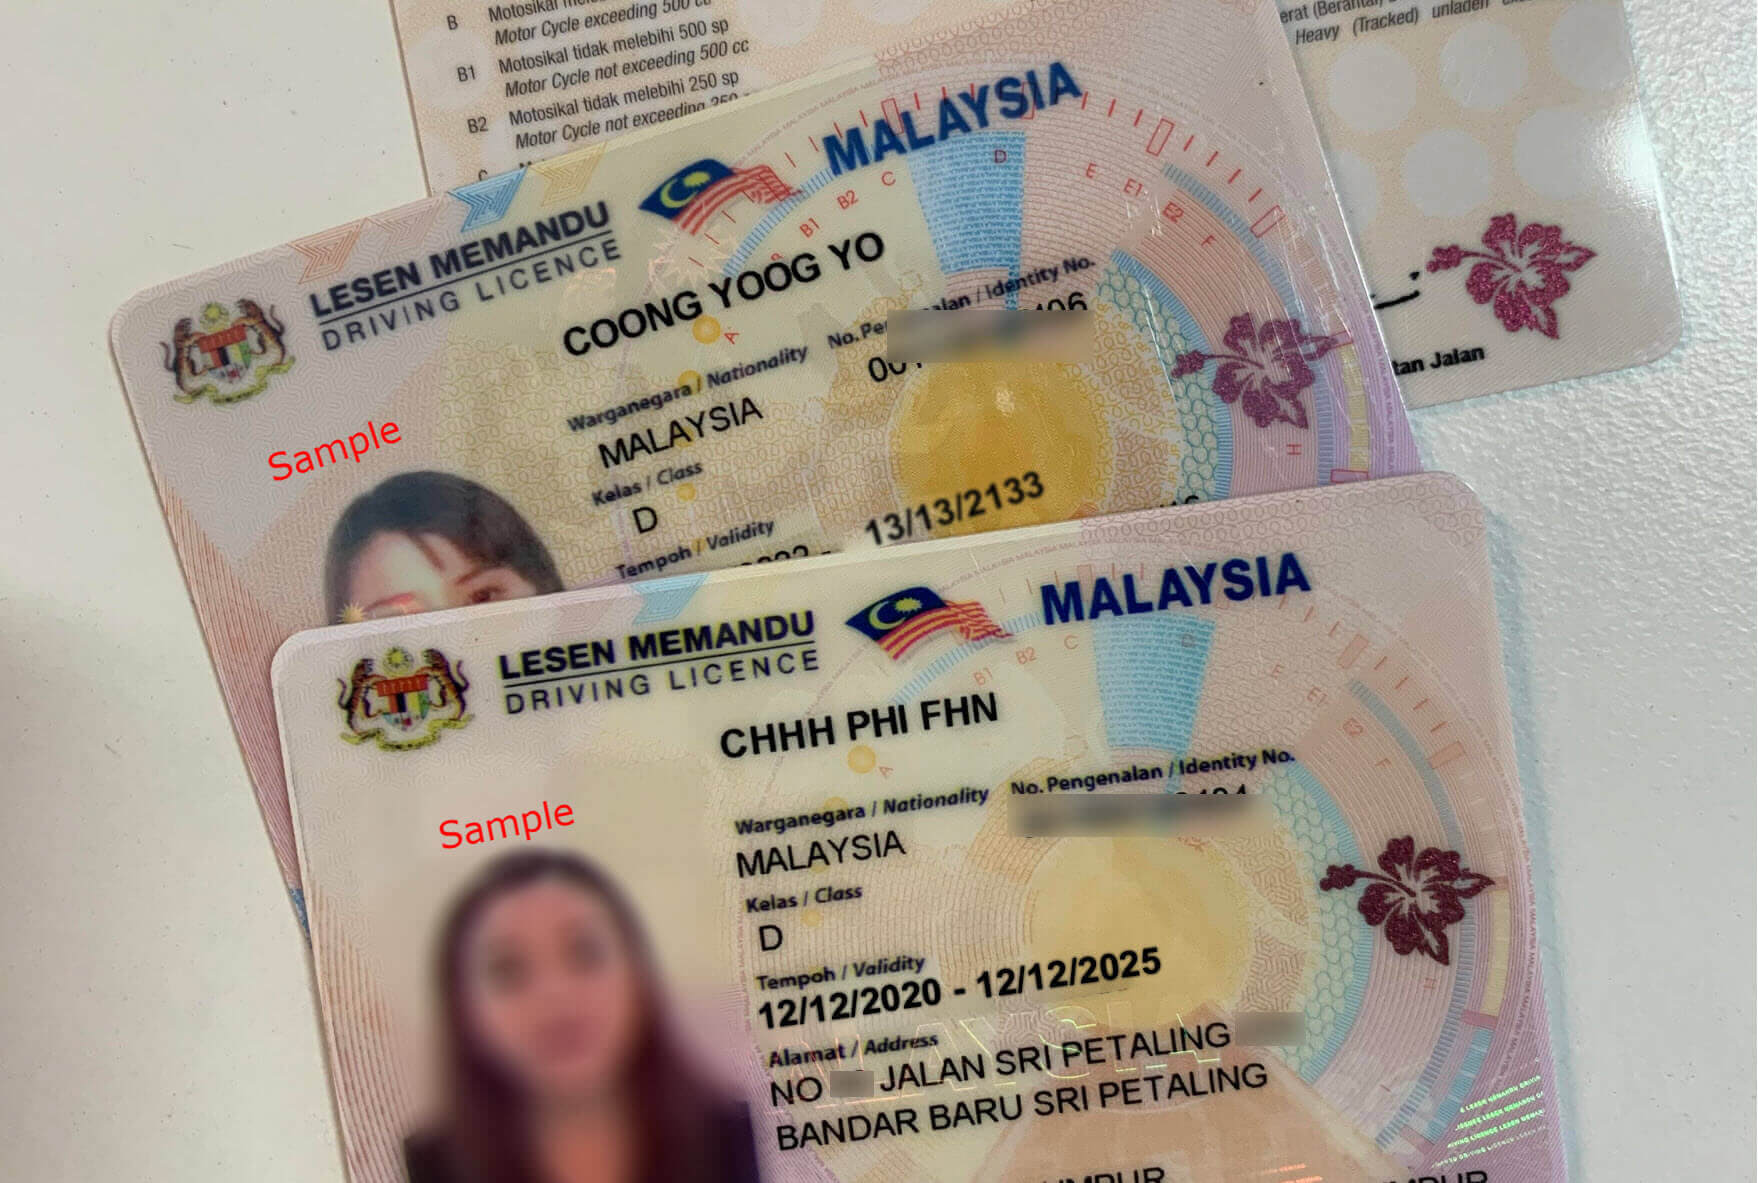 The Complete Guide to Renewing Your Driving License in Malaysia